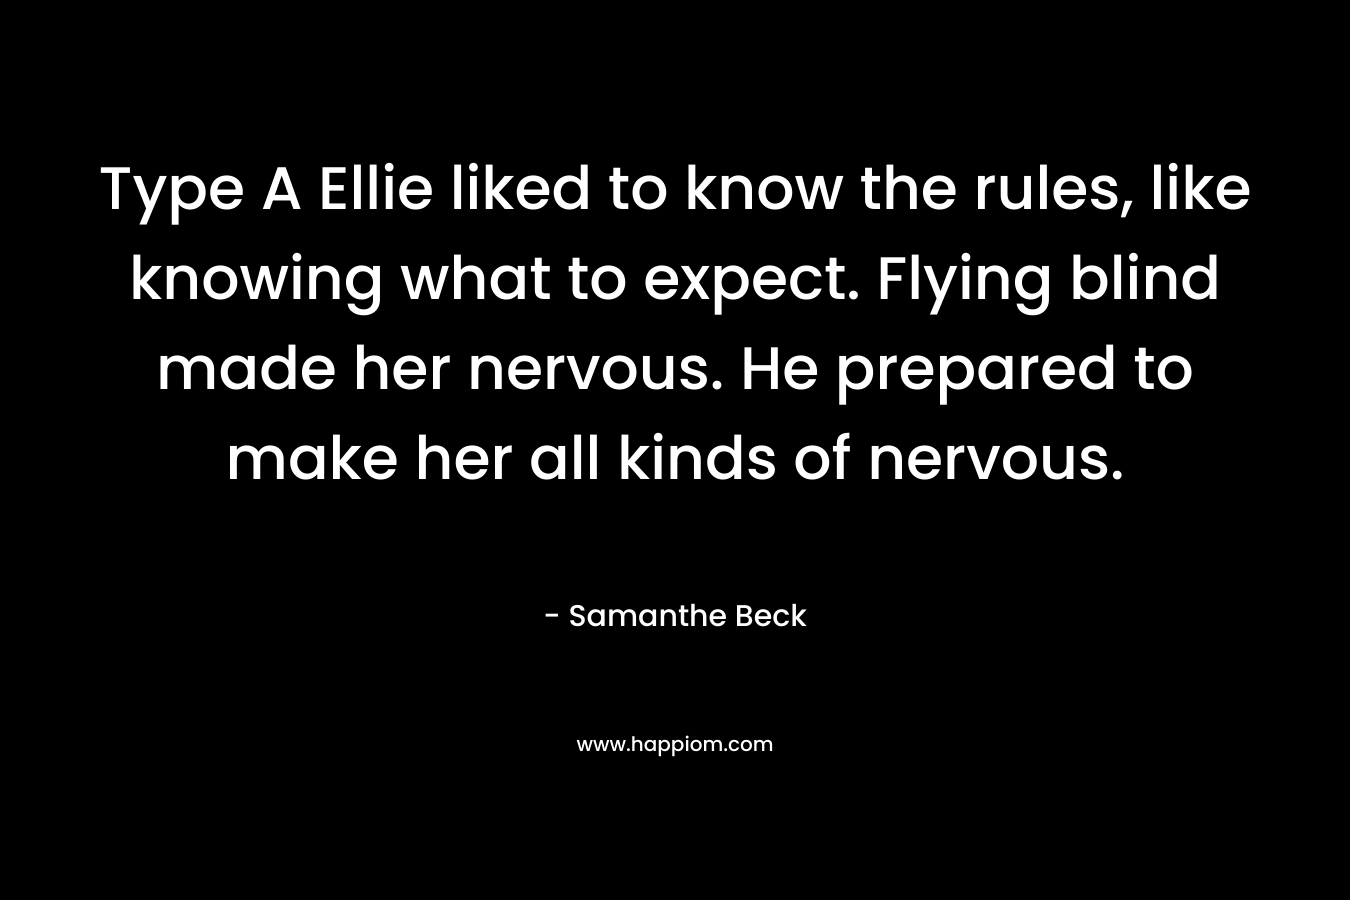 Type A Ellie liked to know the rules, like knowing what to expect. Flying blind made her nervous. He prepared to make her all kinds of nervous.